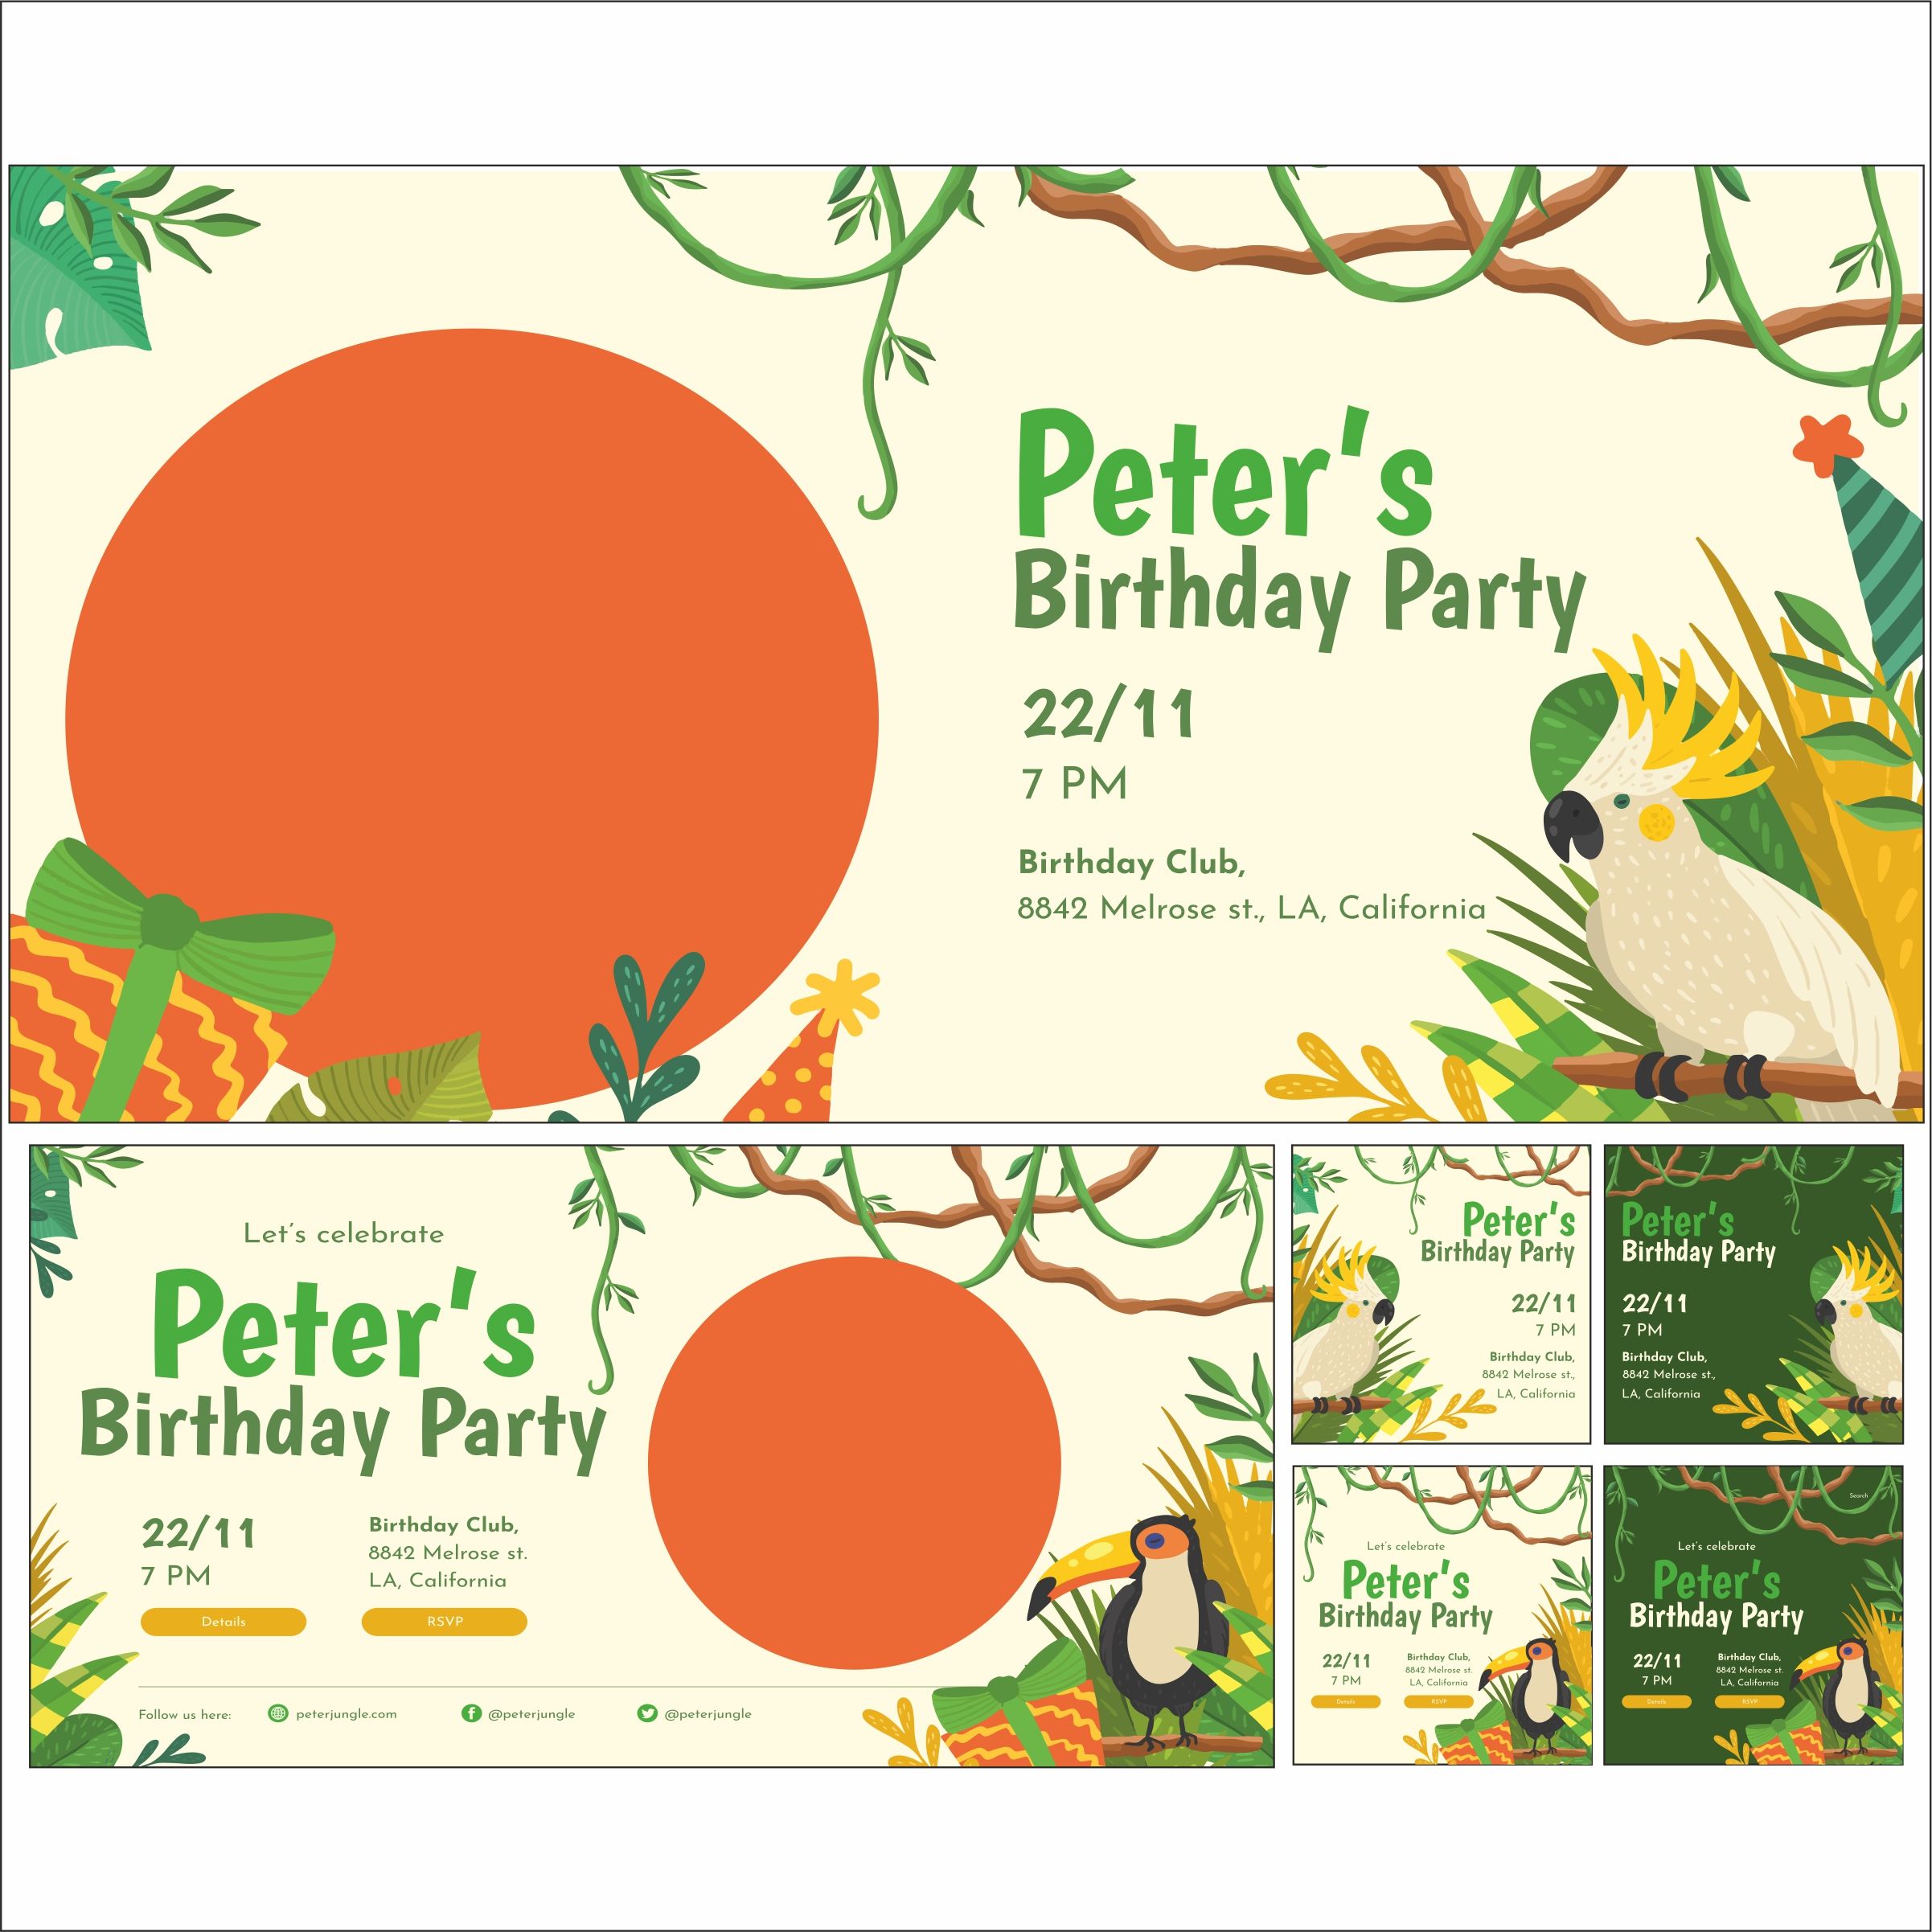 "Peter's Birthday 2 Celebration Pack: Banner with Invite Card Designs" cover image.